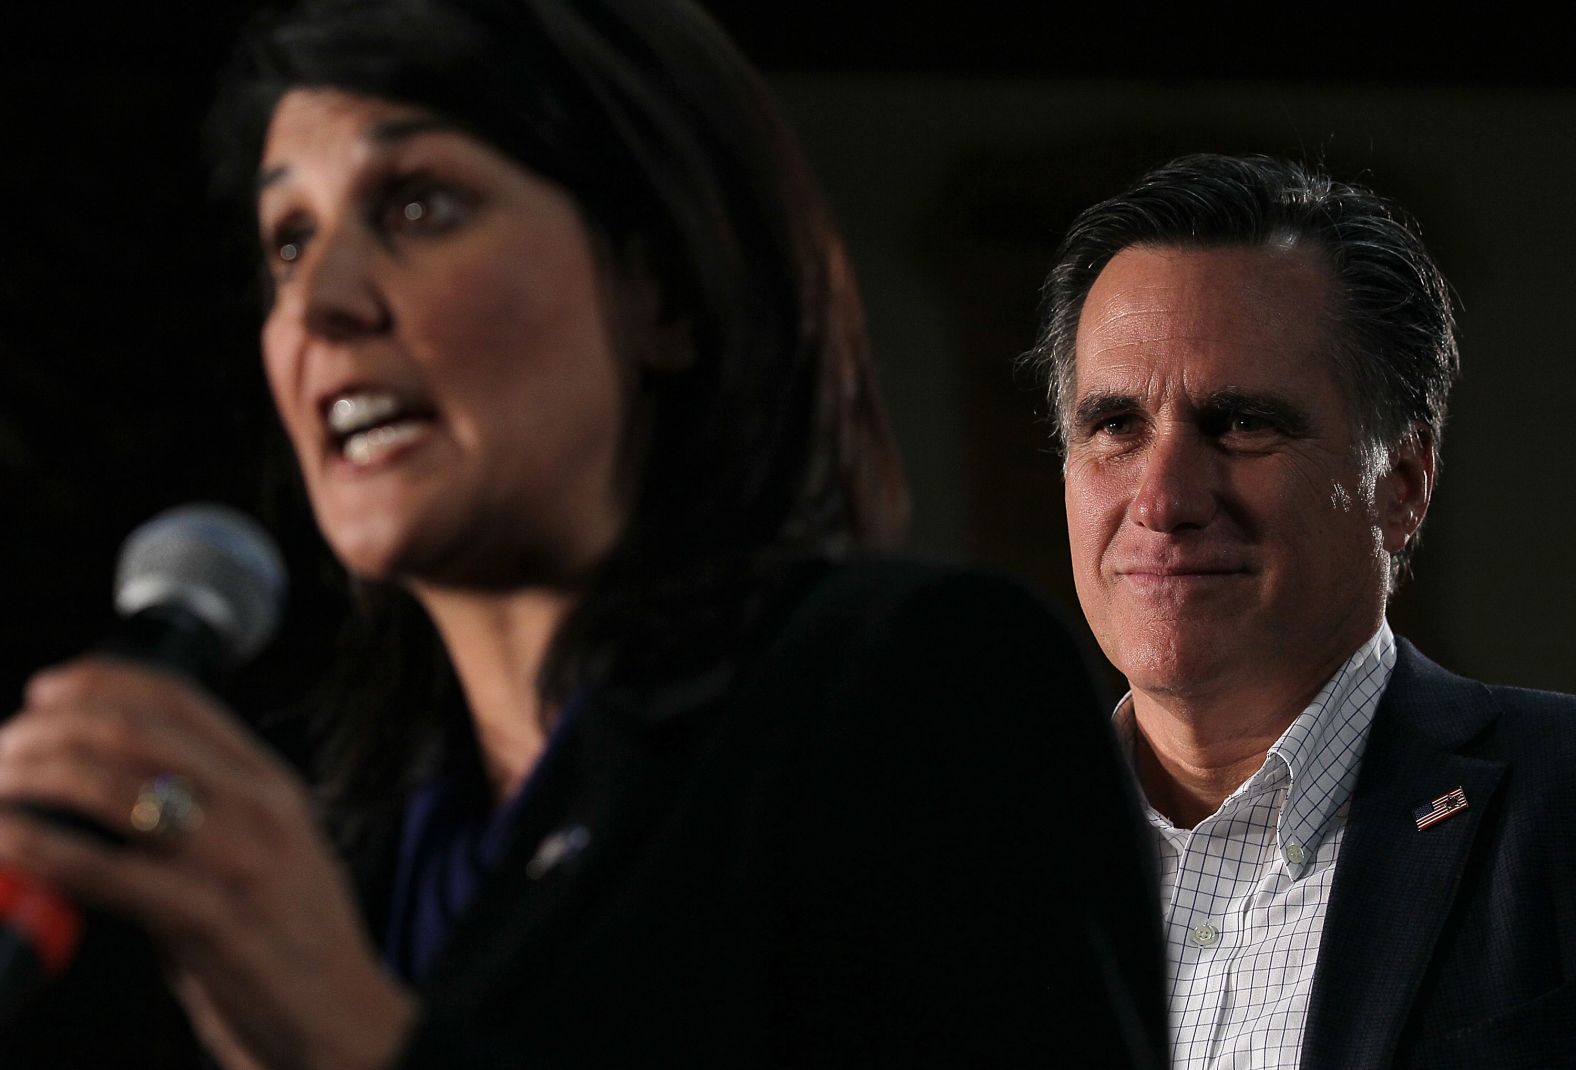 Haley campaigns for presidential candidate Mitt Romney in 2012.